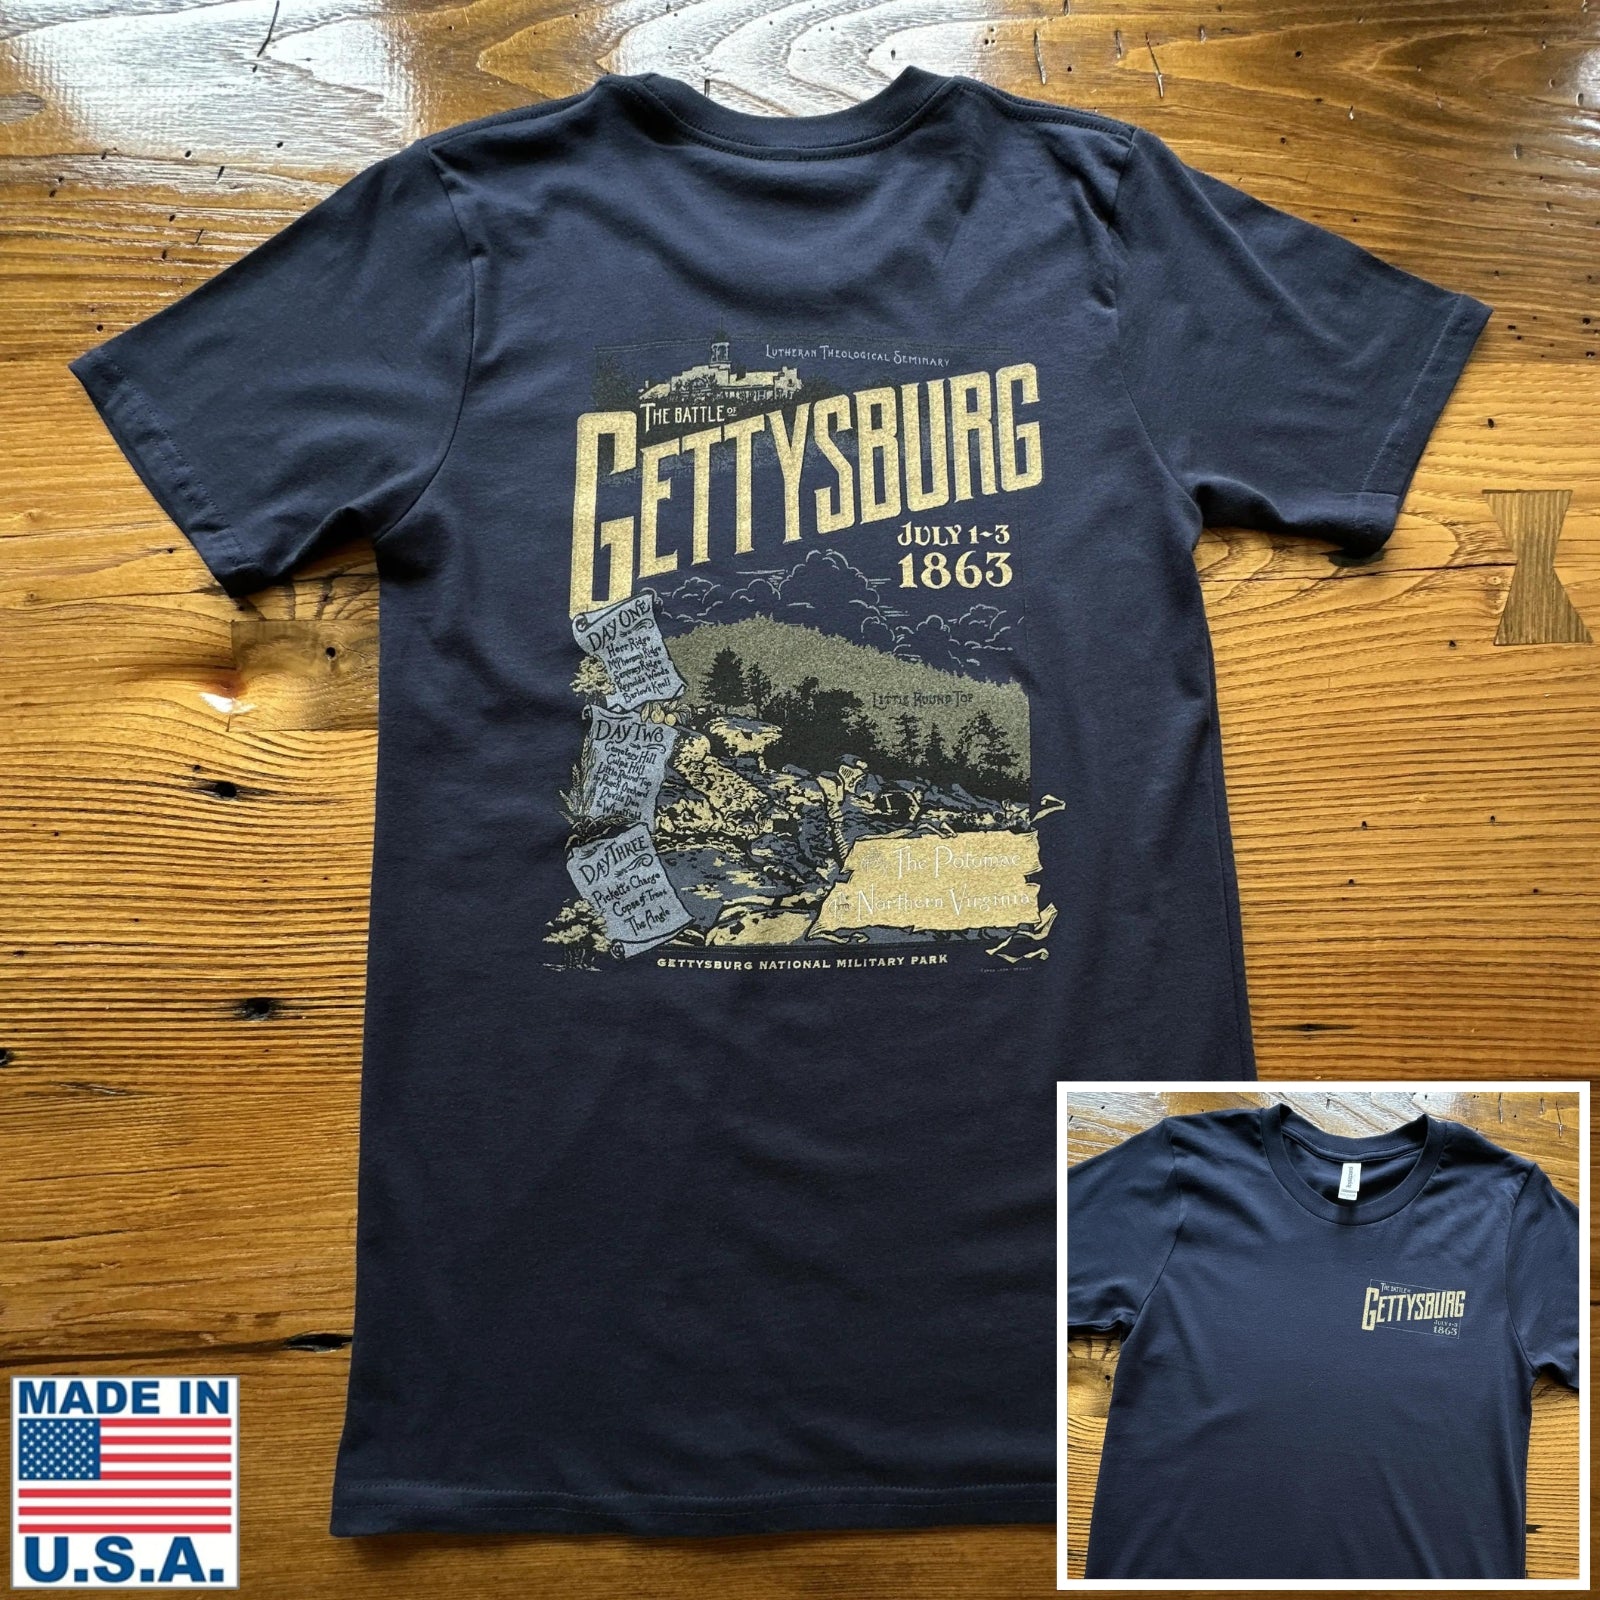 Navy "The Battle of Gettysburg" Shirt from The History List store